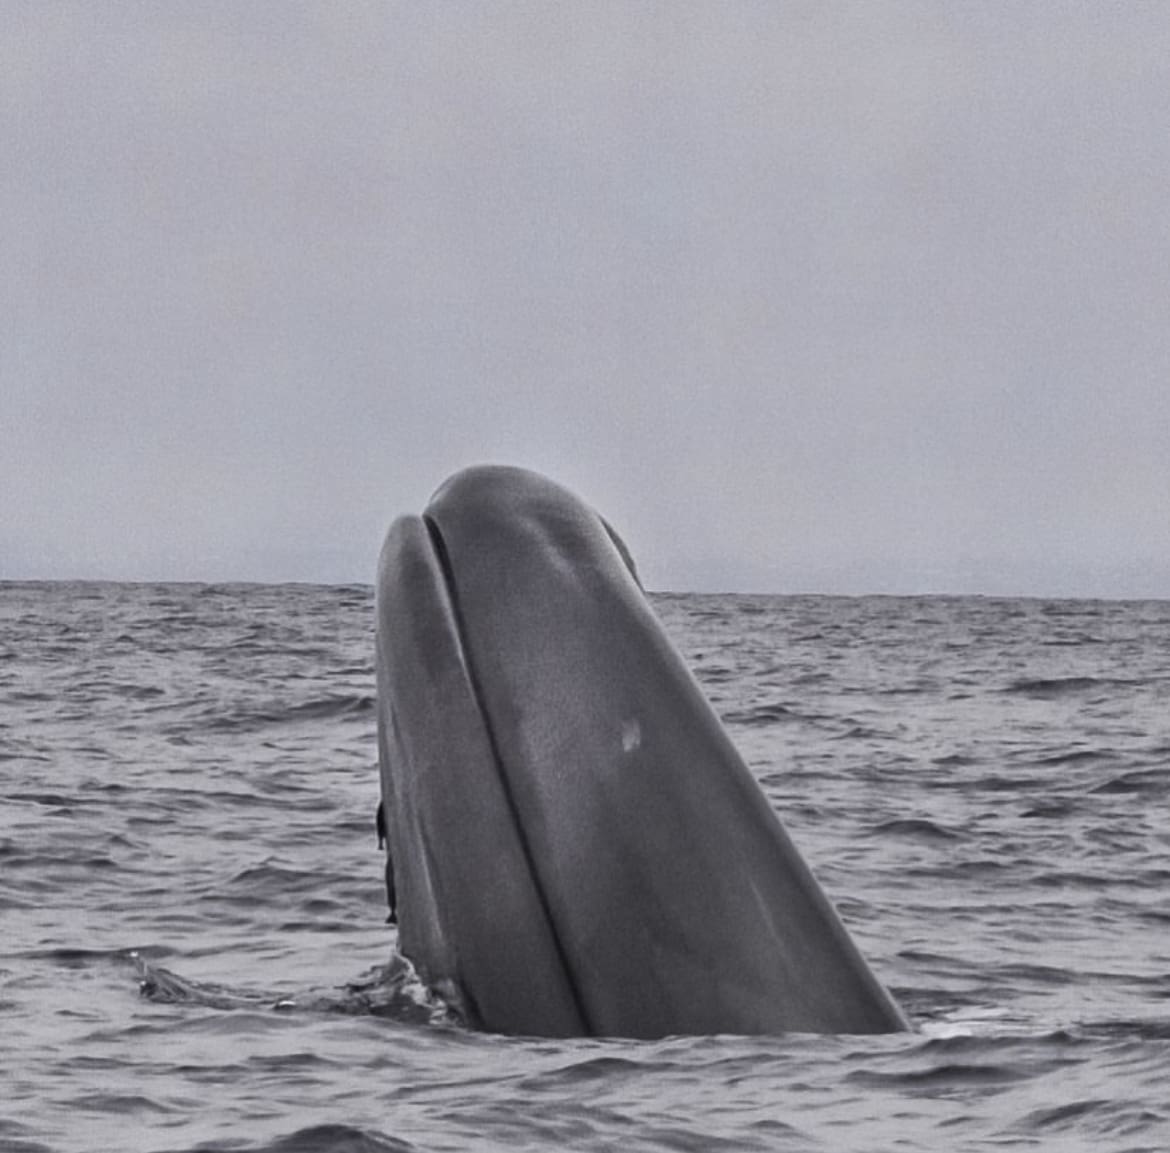 Blue whale breaching the surface of the water with its mouth